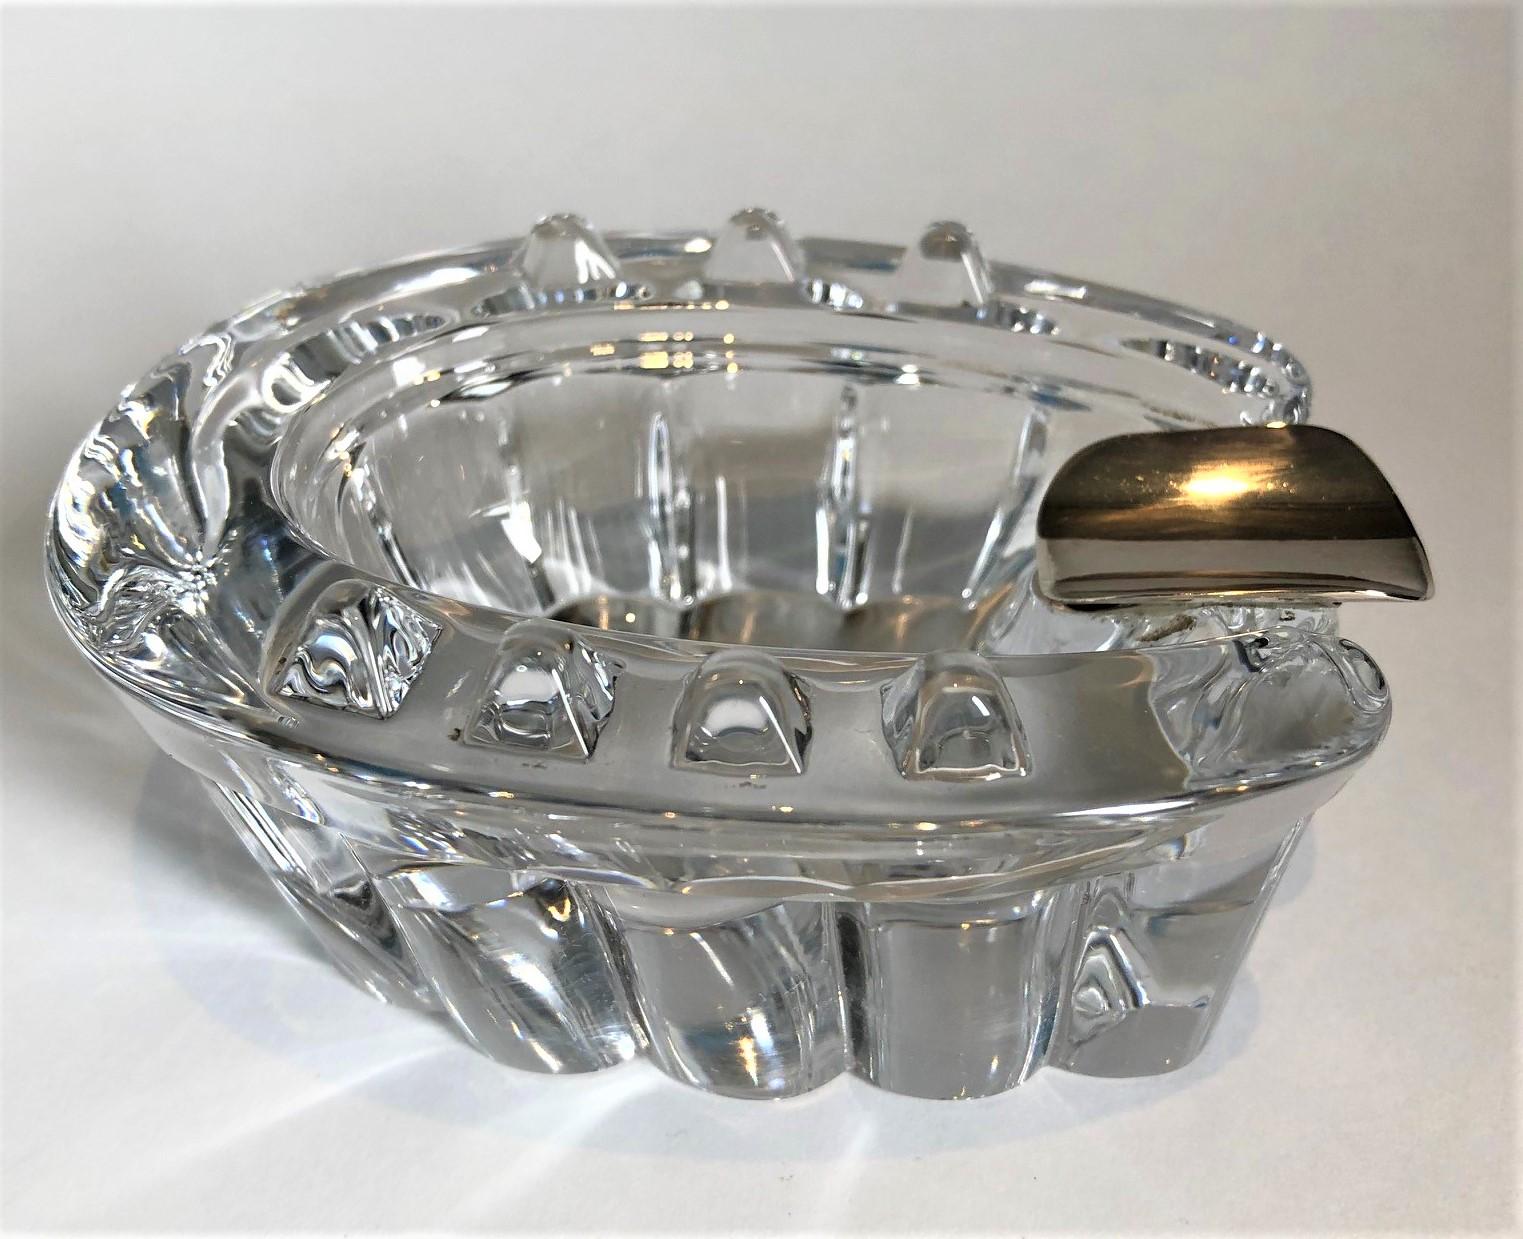 Fantastic cut crytal glass and silver horseshoe cigar / cigarette ashtray
Crystal & sterling silver lucky horseshoe ashtrays
Vintage 1930s clear crystal ashtray in the shape of a horse shoe.
Perfect gift for any equestrian / polo horses fan.